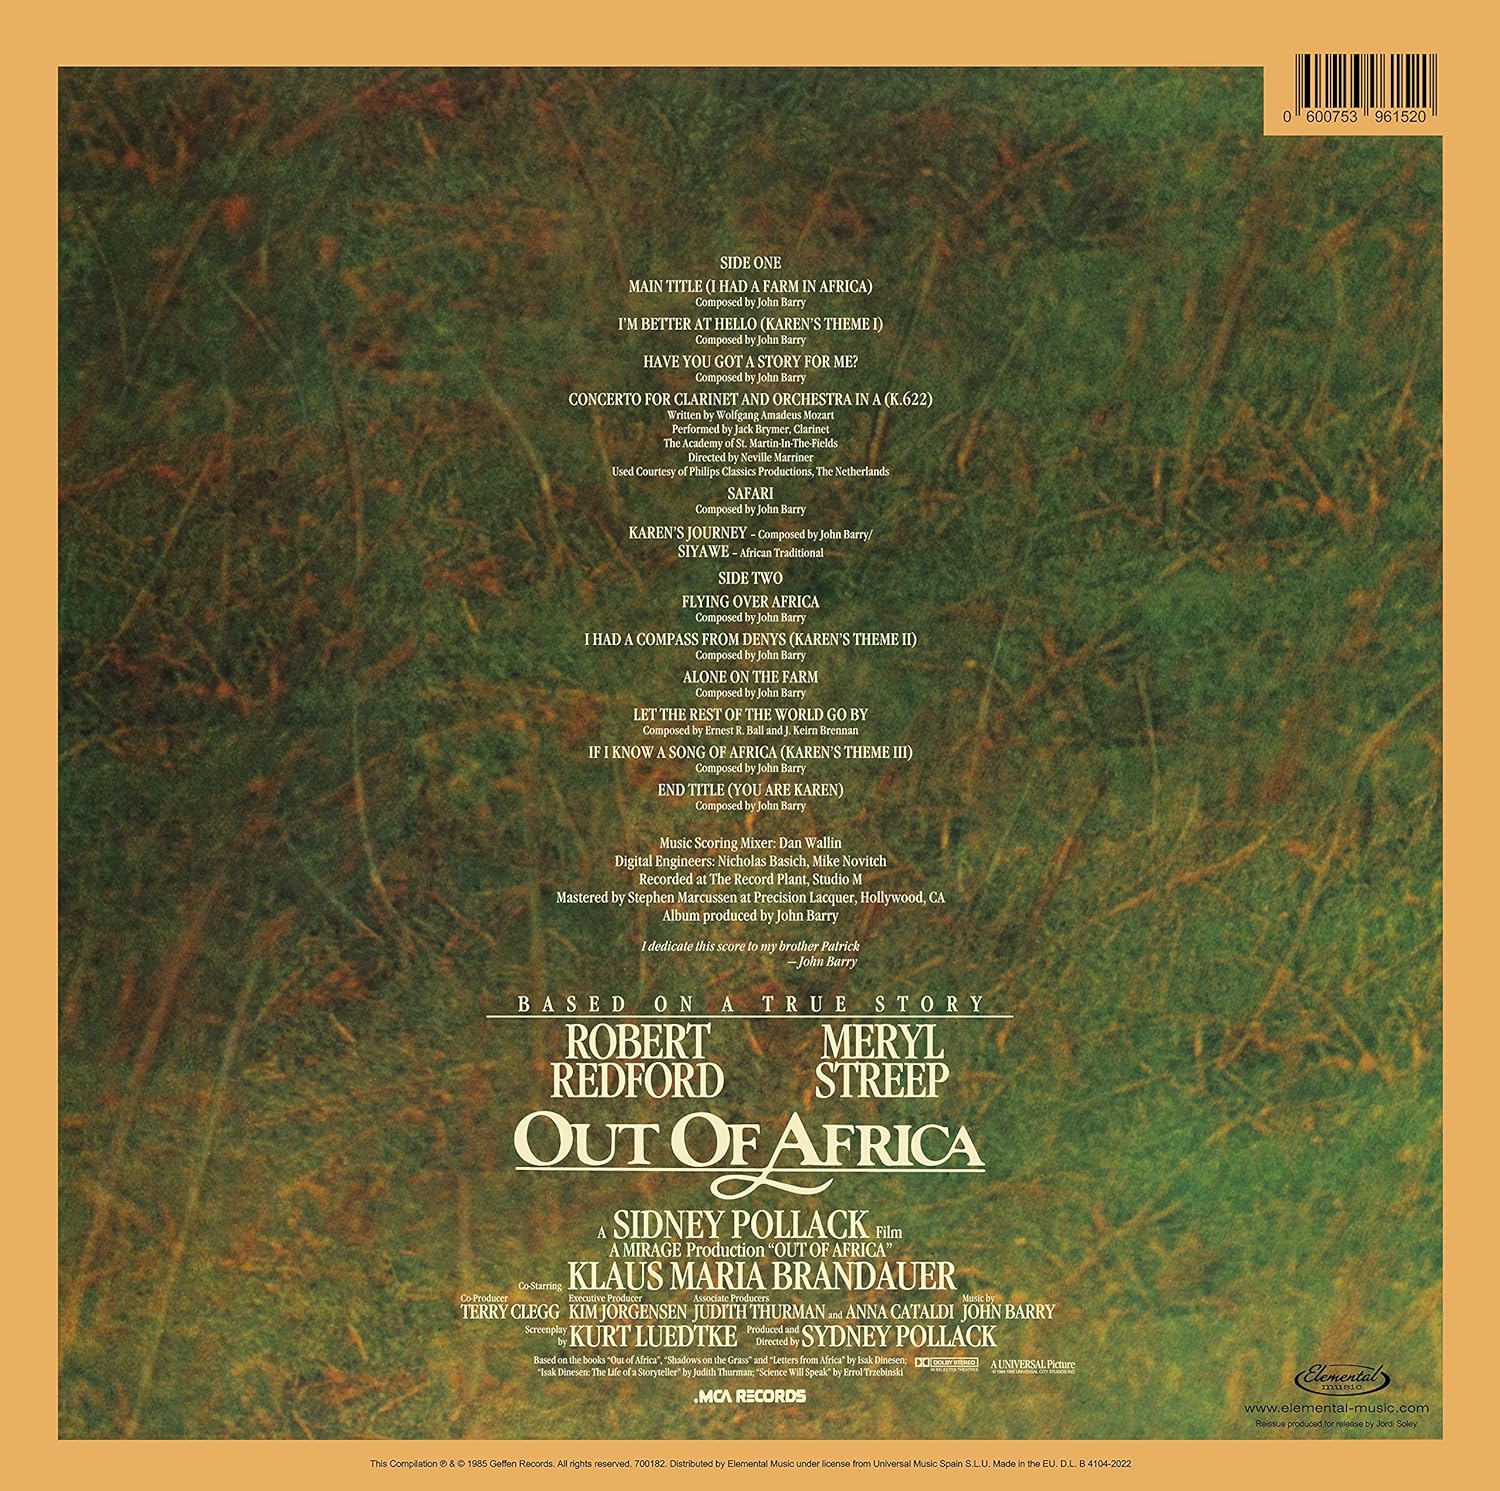 Out Of Africa (Music From The Motion Picture Soundtrack) (Vinyl LP)